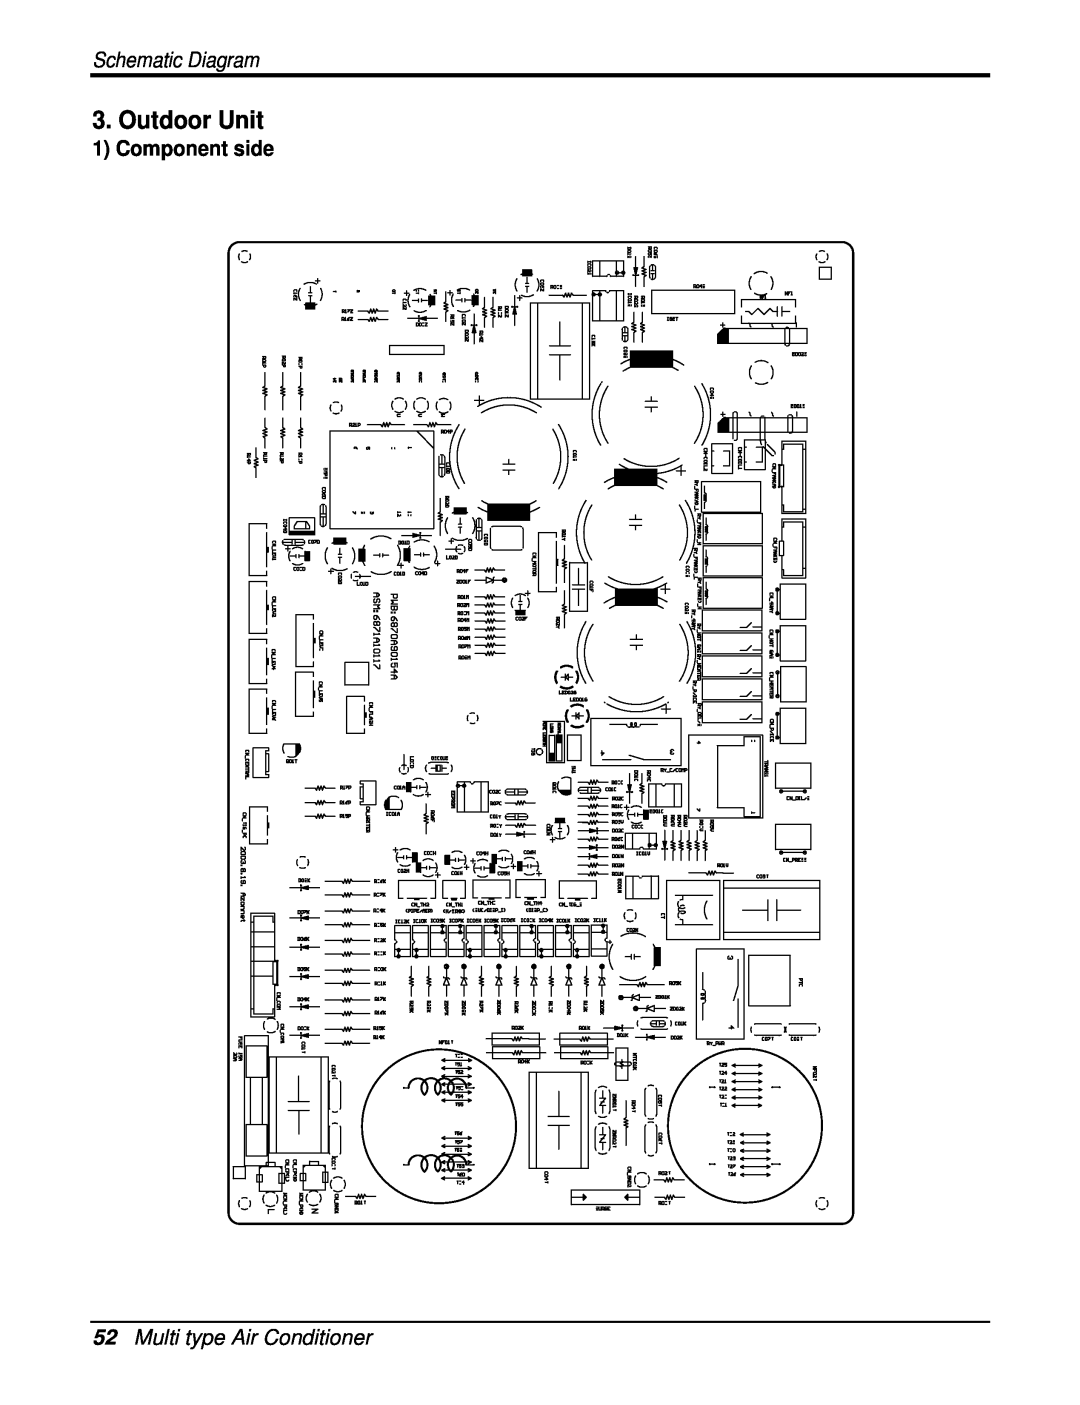 Heat Controller DMH18DB-1 manual Outdoor Unit, 52Multi type Air Conditioner, Schematic Diagram, Component side 